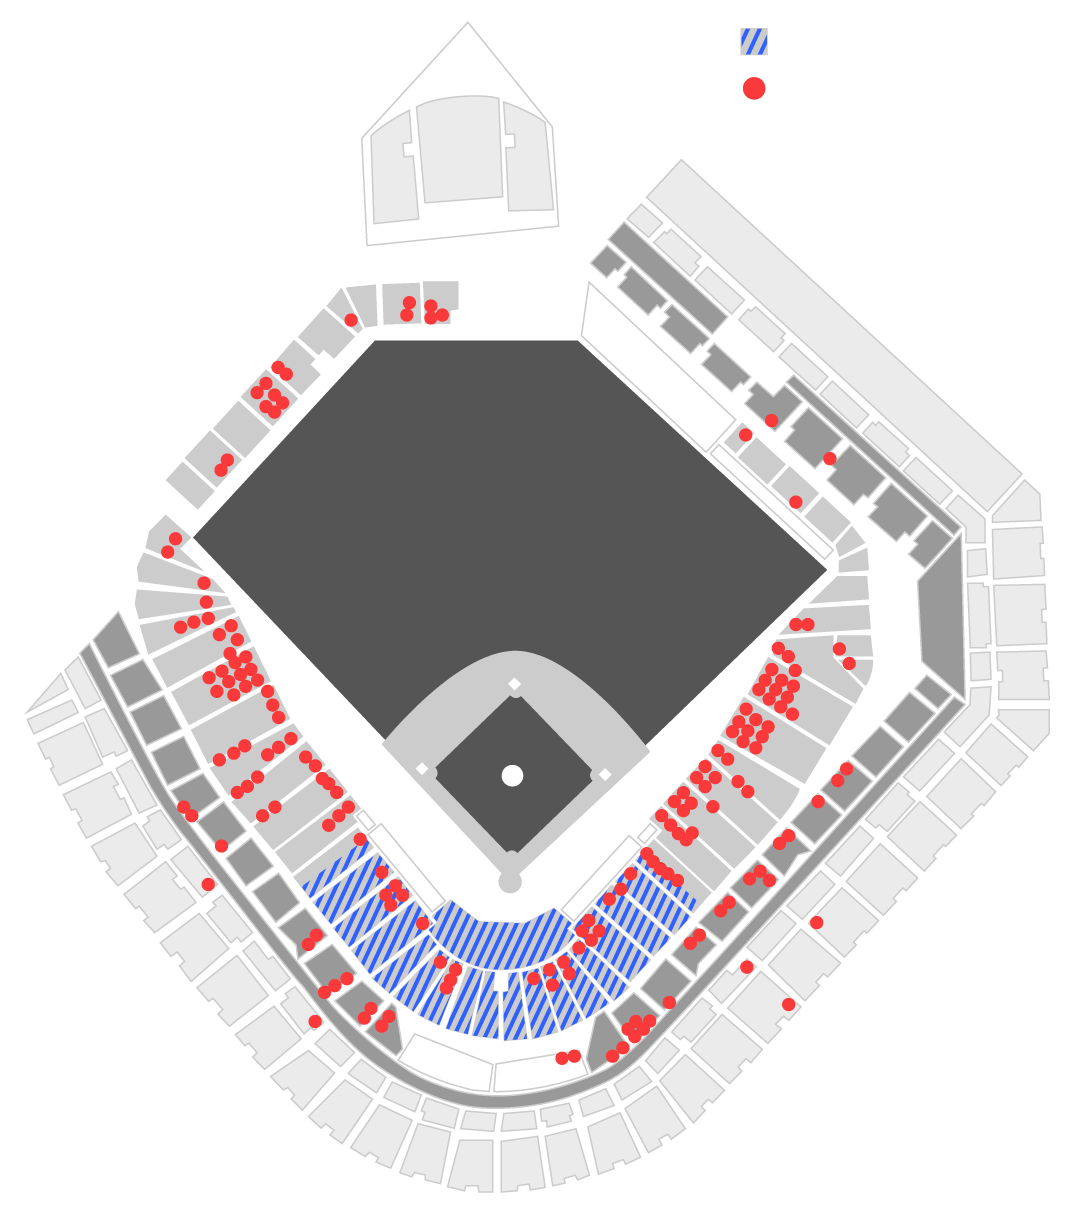 seating chart coors field